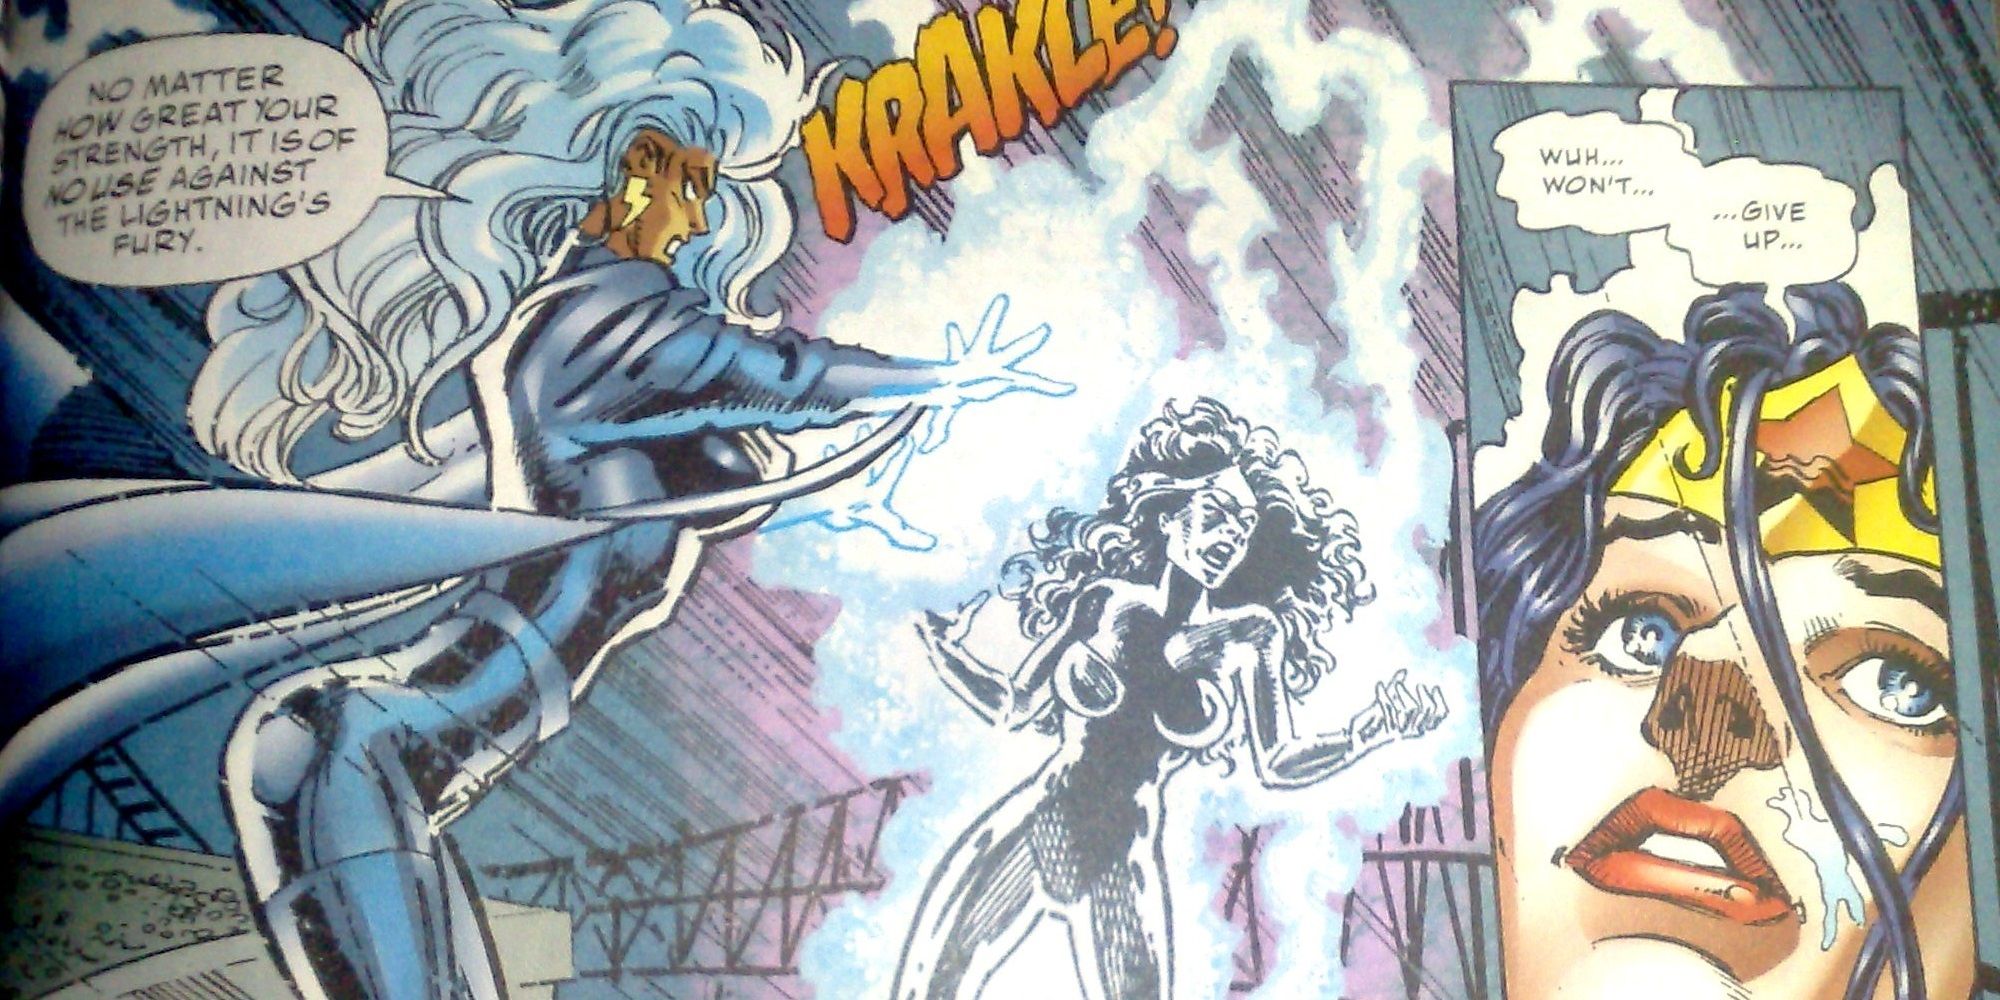 Wonder Woman being electrocuted by Storm